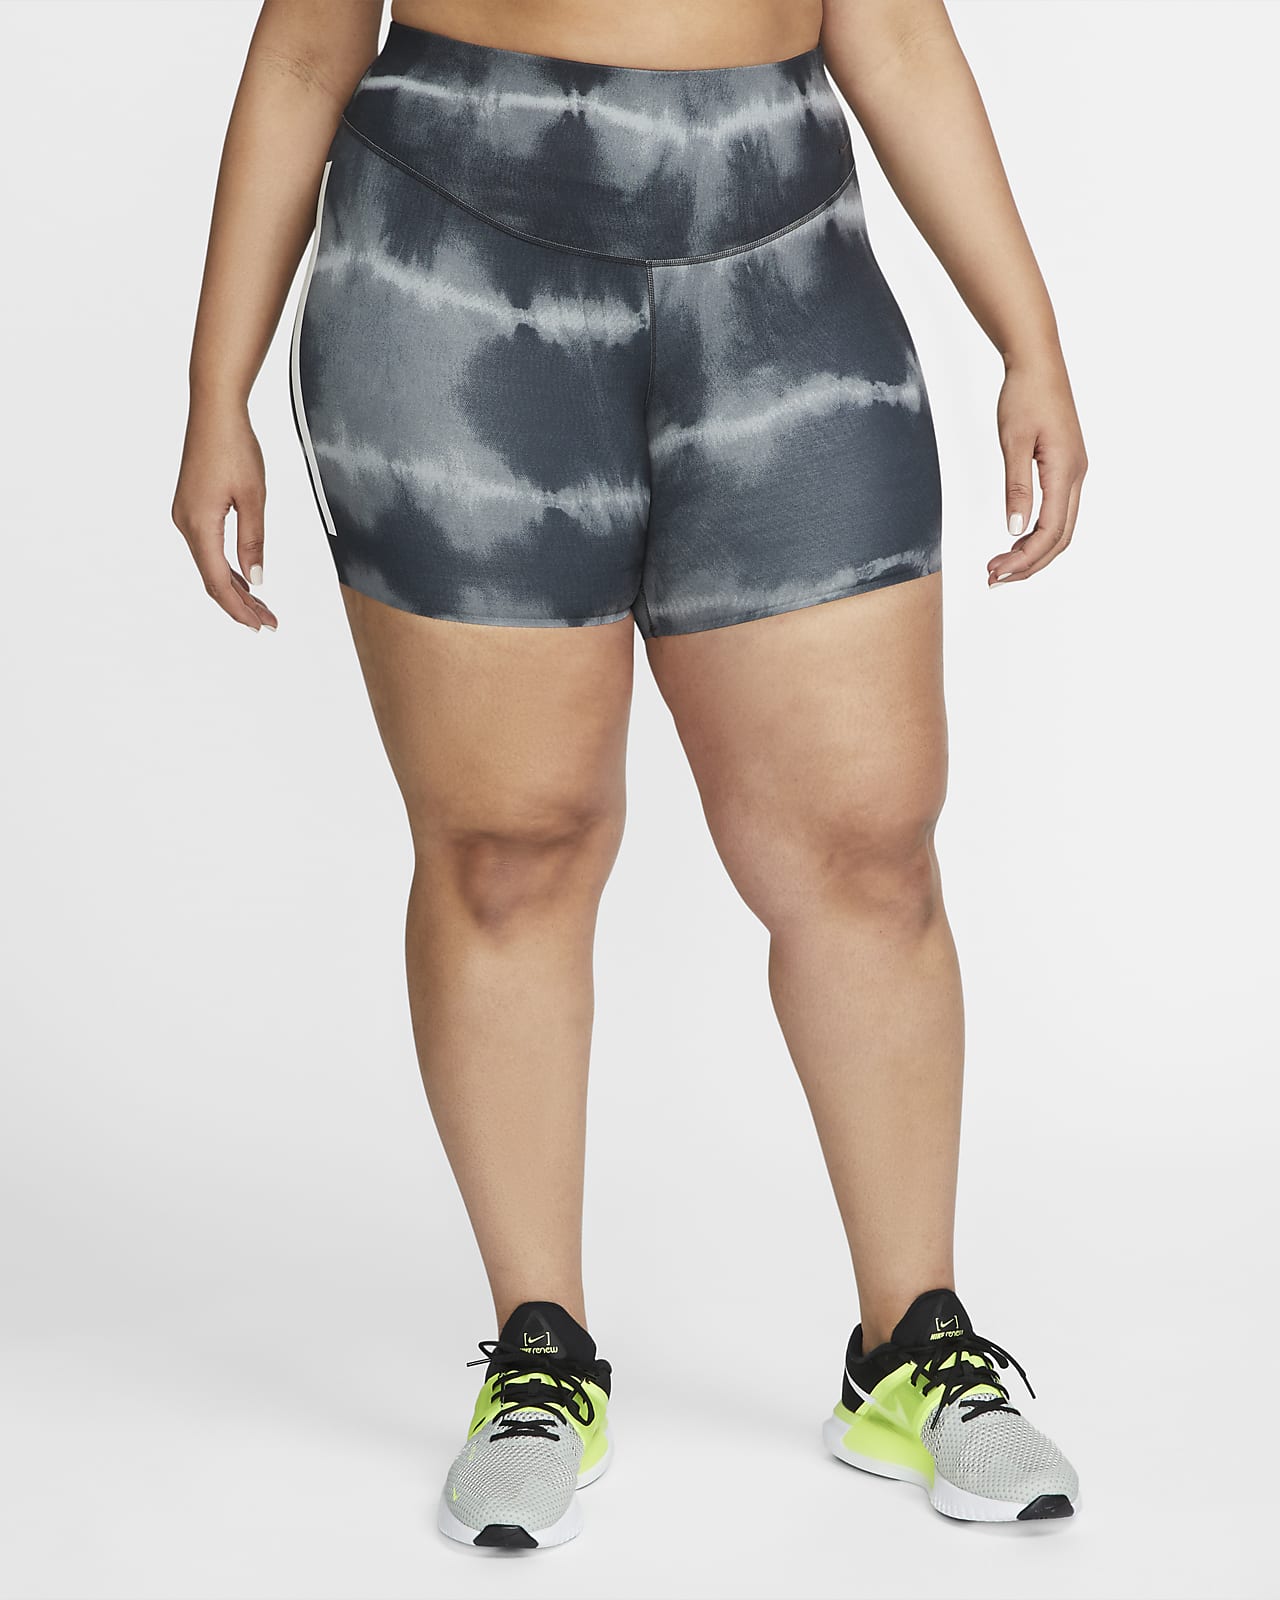 Nike One Luxe Women's 7 Mid-Rise Printed Training Shorts (Plus Size).